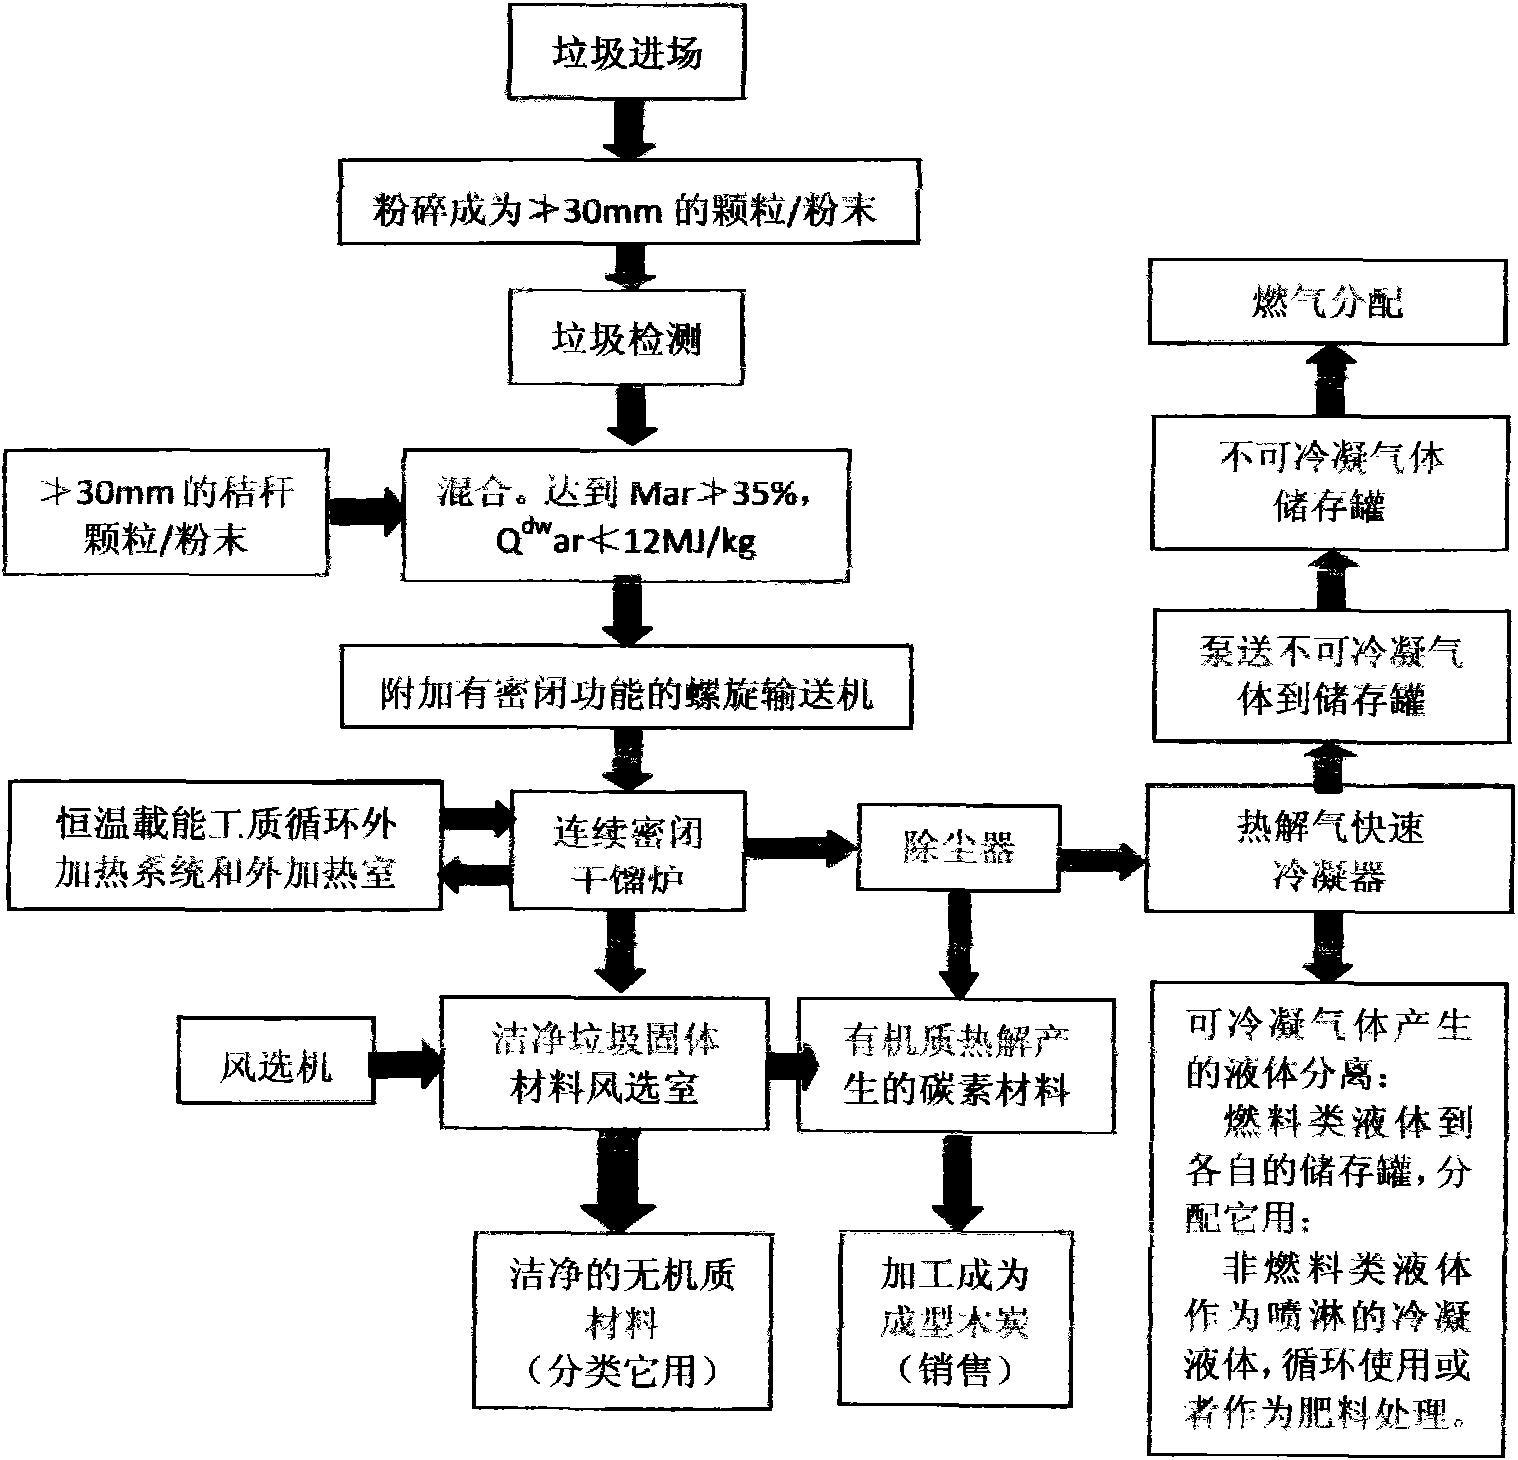 Method of harmless and recycle treatment of garbage